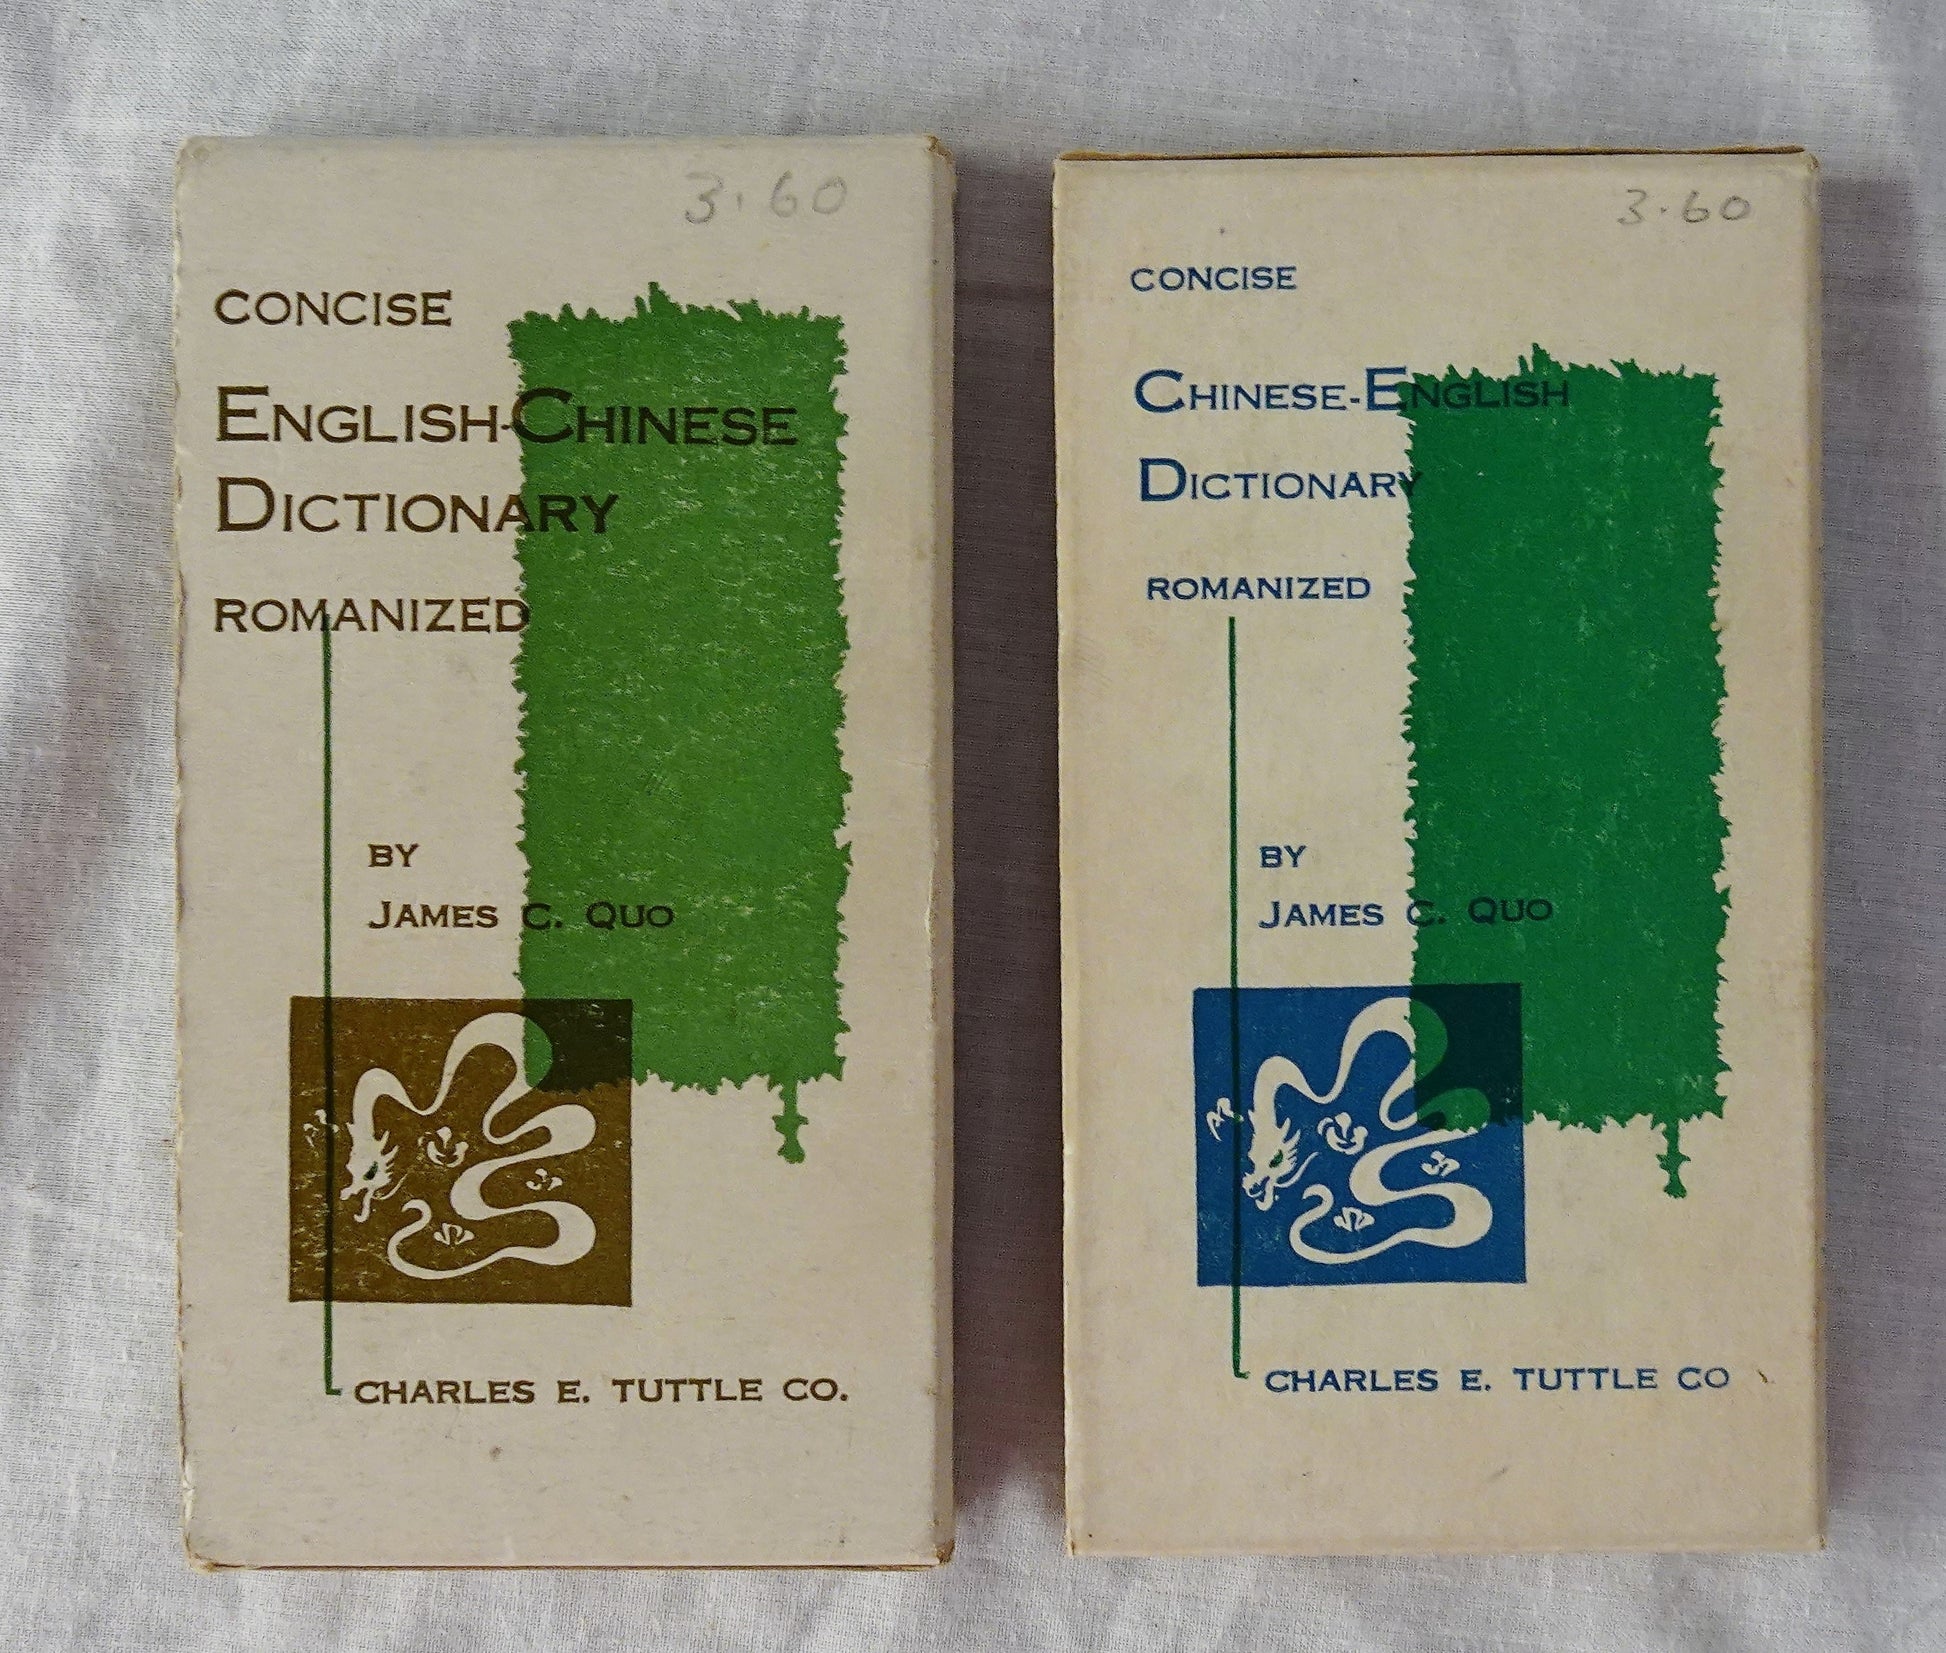 Concise English-Chinese Dictionary Romanized  Concise Chinese-English Dictionary Romanized  by James C. Quo